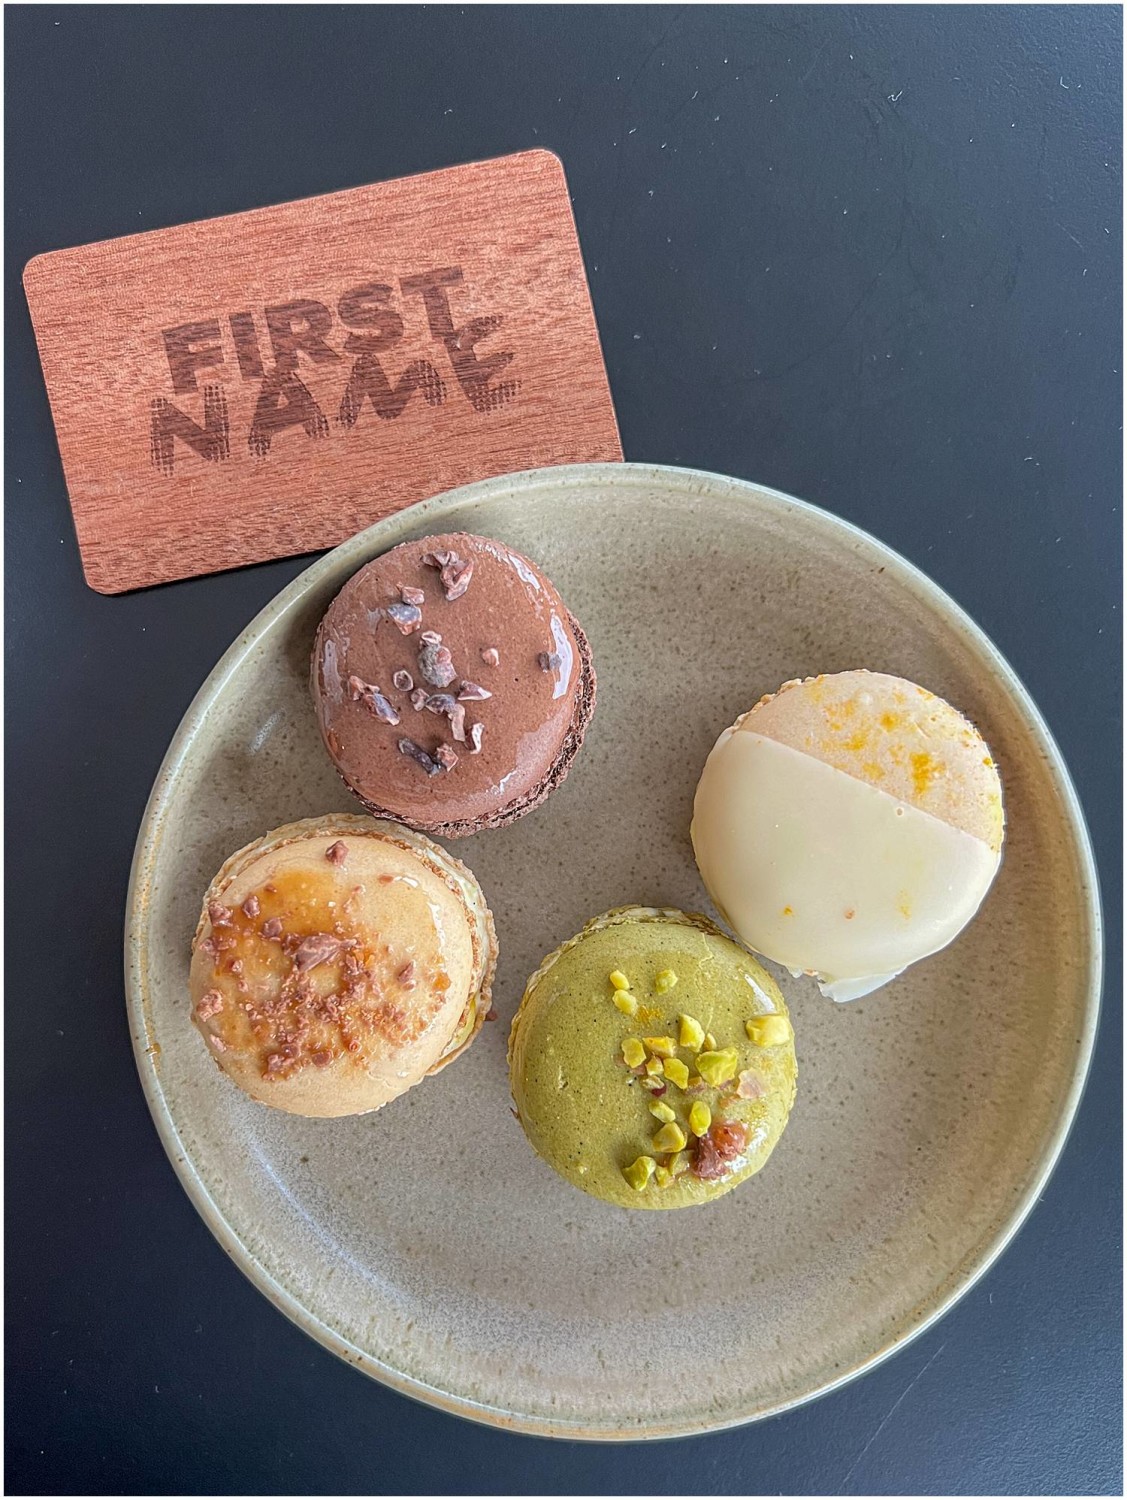 An overview of a plate of four pastries and a card that says "FirstName."